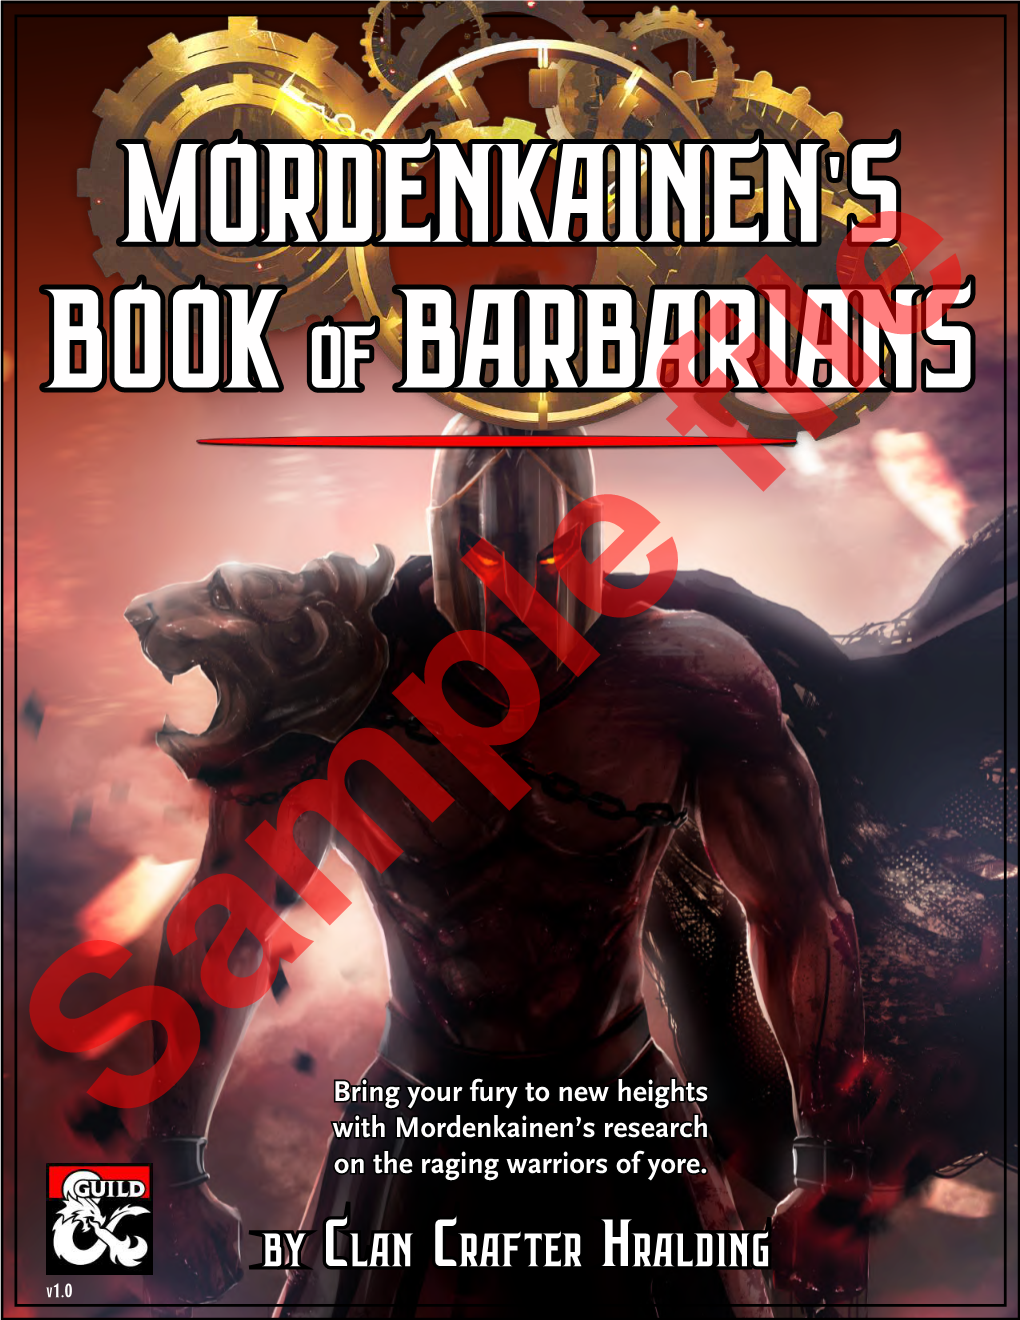 By Clan Crafter Hralding V1.0 MORDENKAINEN’S BOOK of BARBARIANS